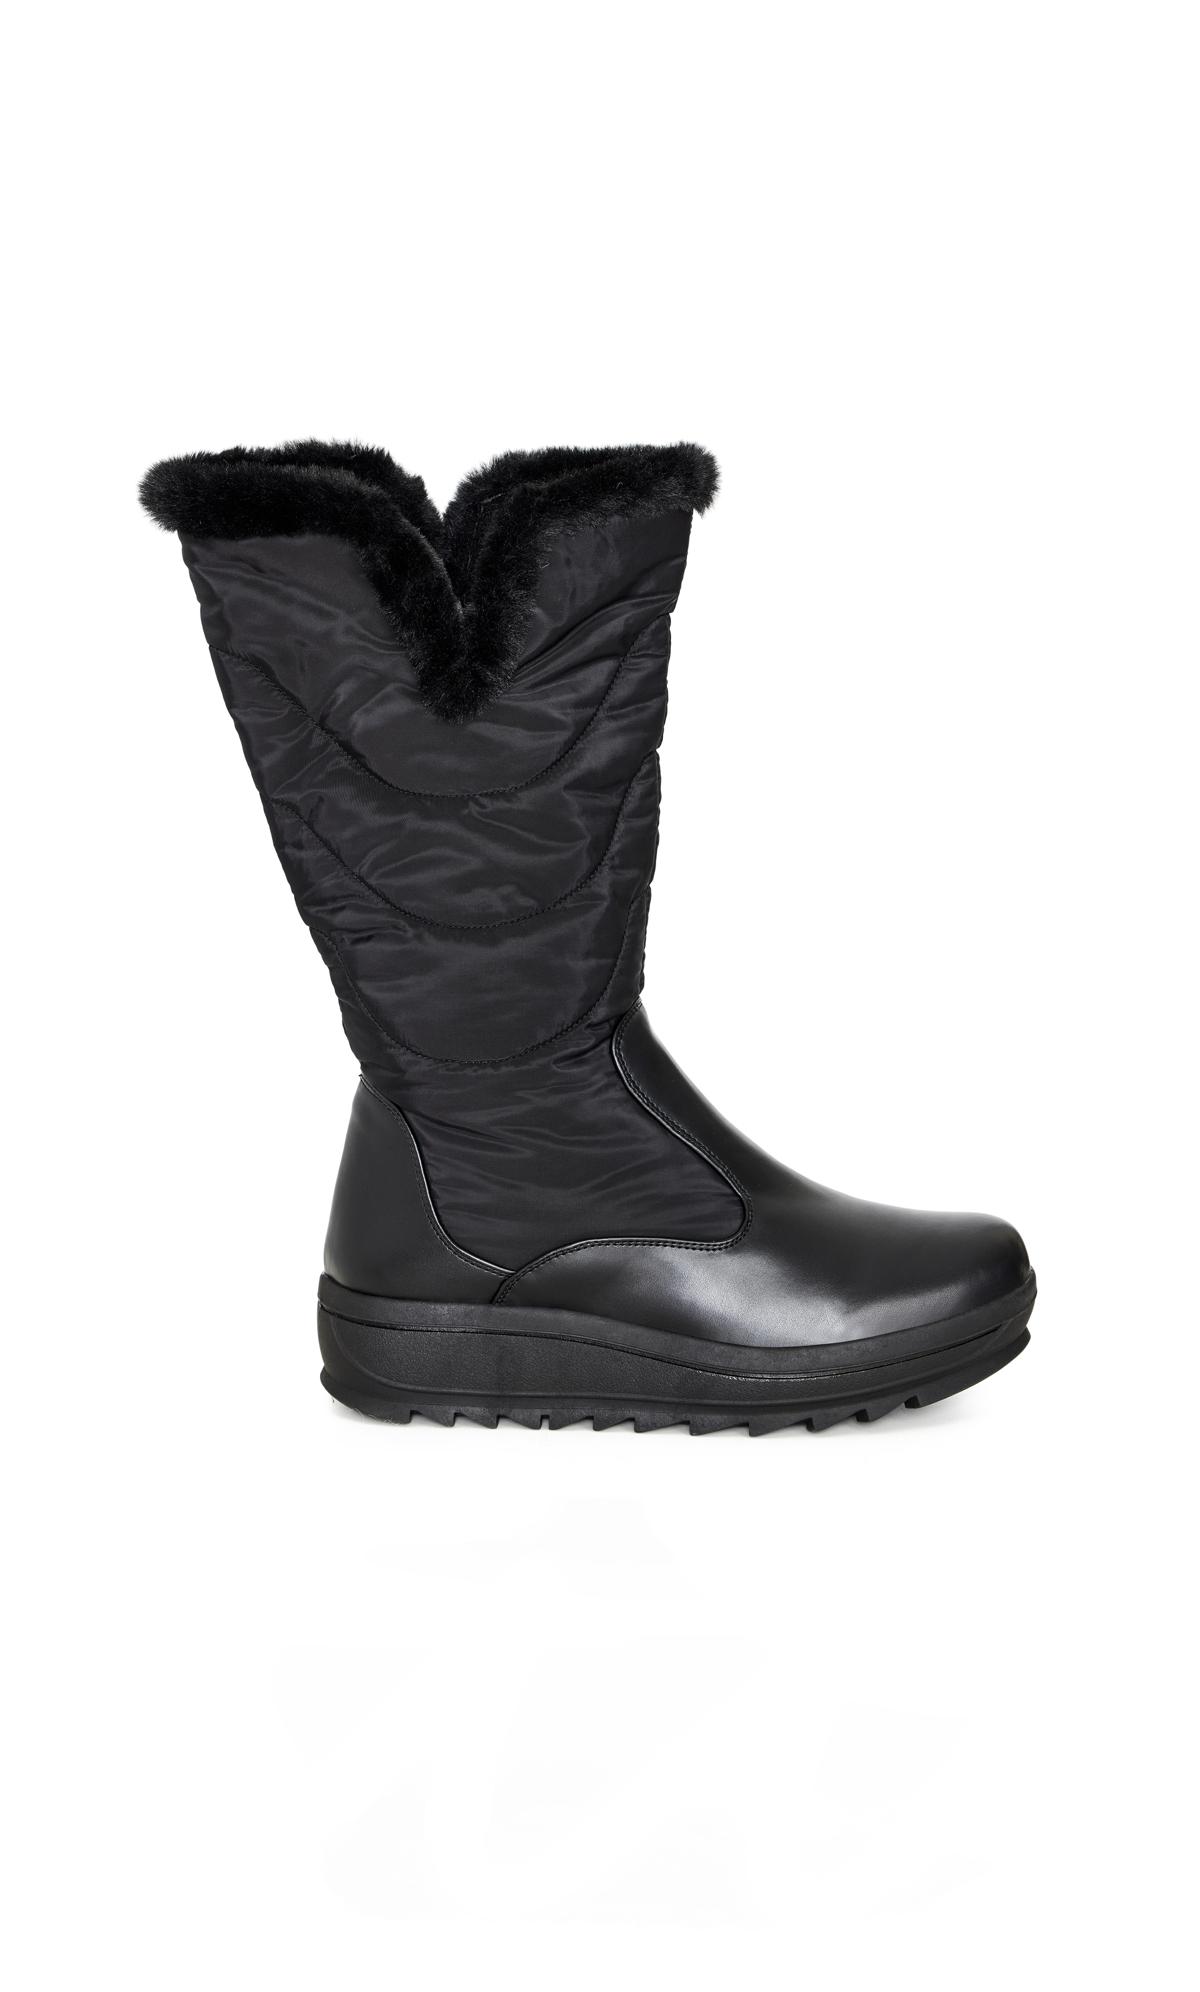 Gianna Black Wide Fit Winter Boot 1